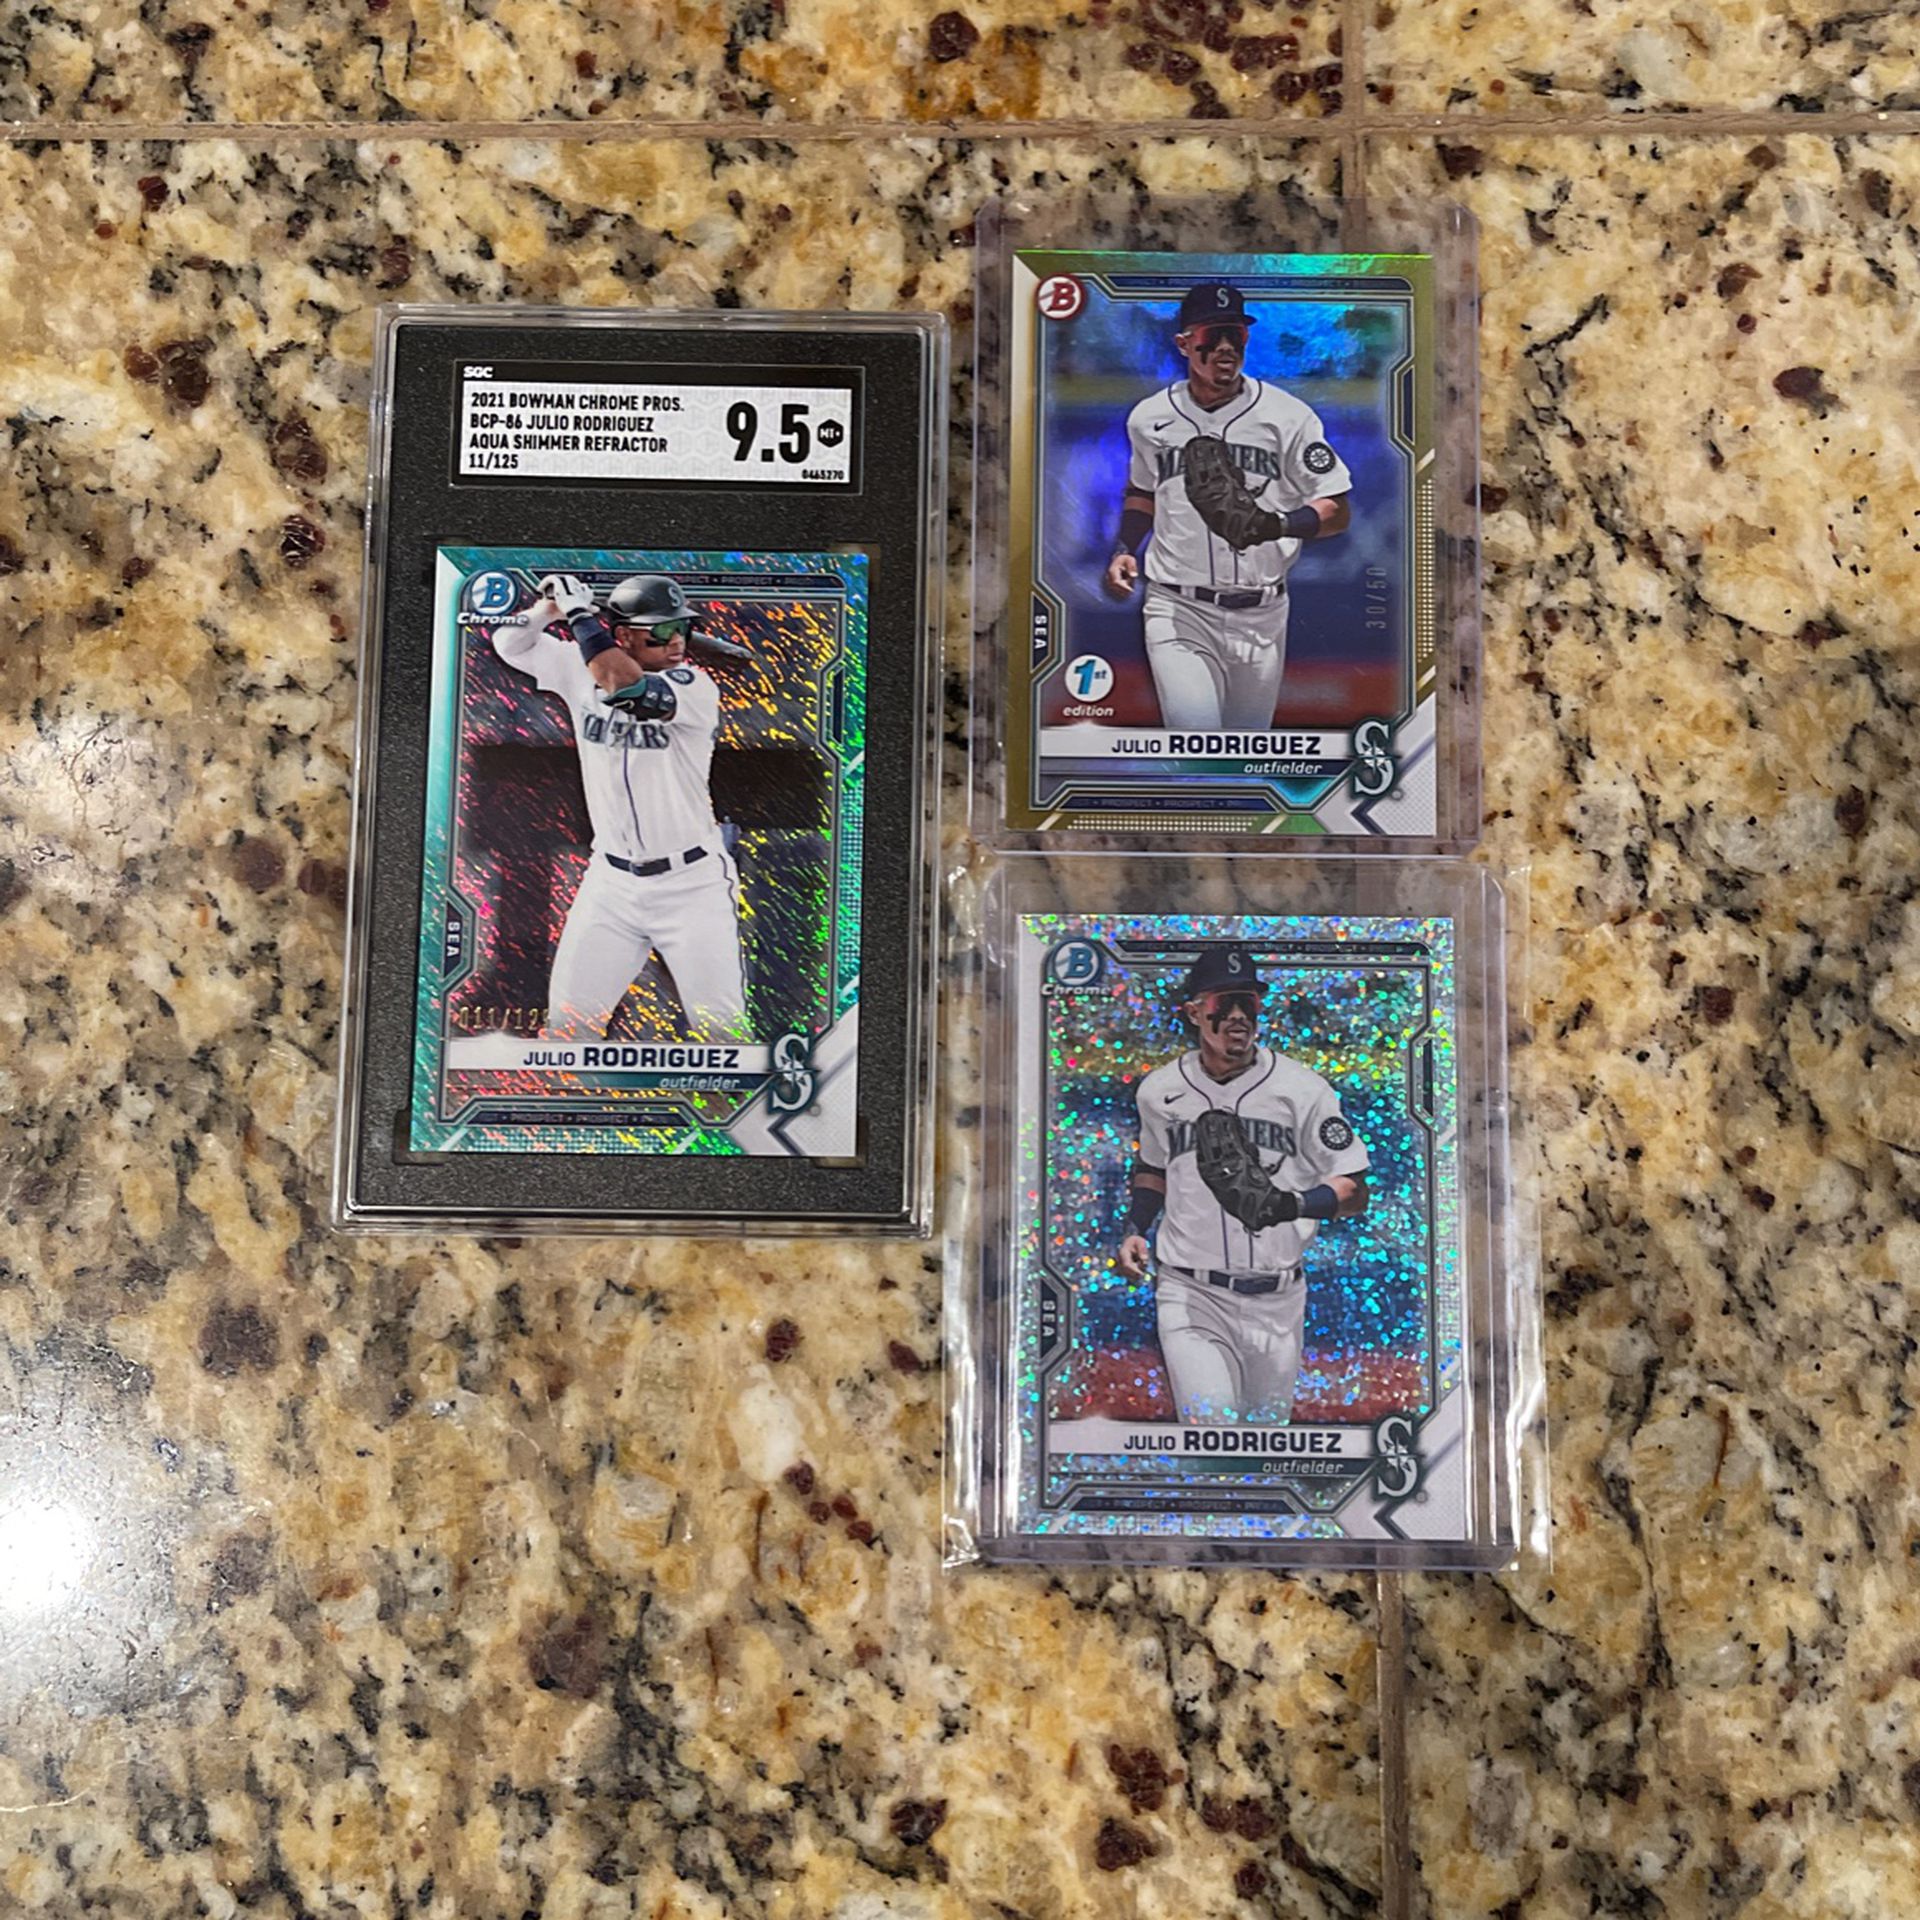 Julio Rodriguez Graded 9.5 MINT Bowman Chrome Rookie Card LOT Mariners RC +  Griffey Upper Deck RC for Sale in Edgewood, WA - OfferUp